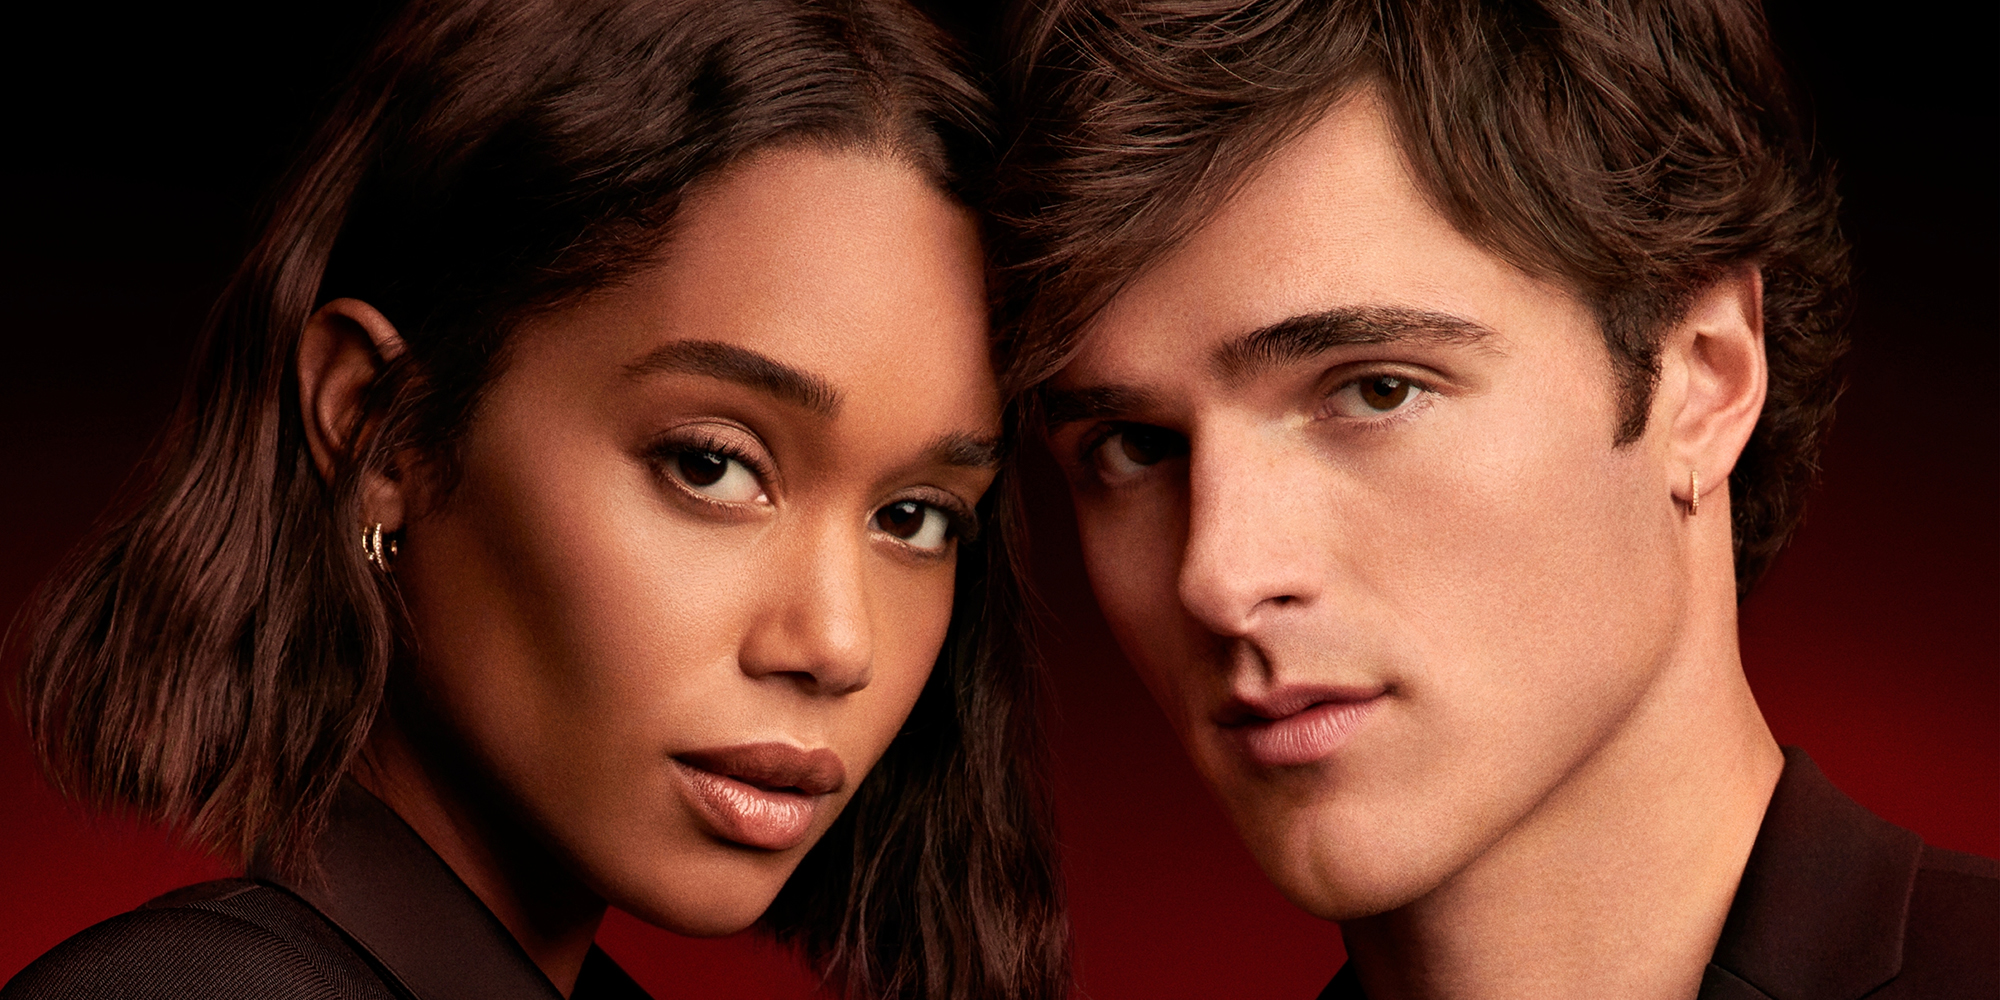 Boss The Scent Elixir Fragrance Film Starring Jacob Elordi and Laura ...